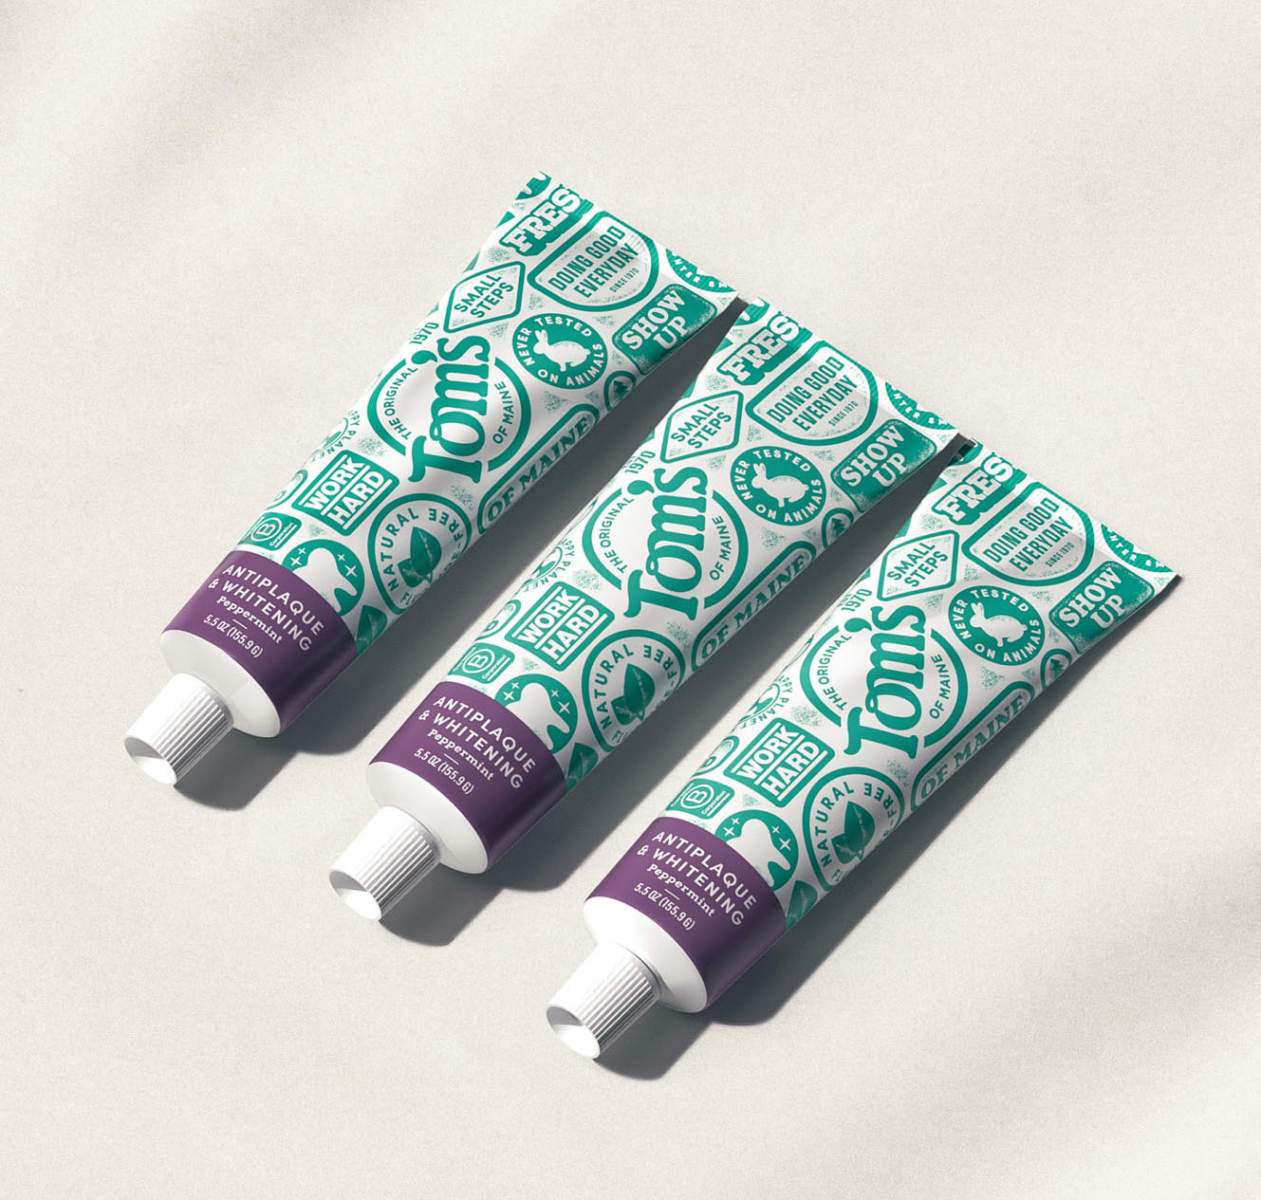 Nessen Company Tom's of Maine Toothpaste Packaging Design